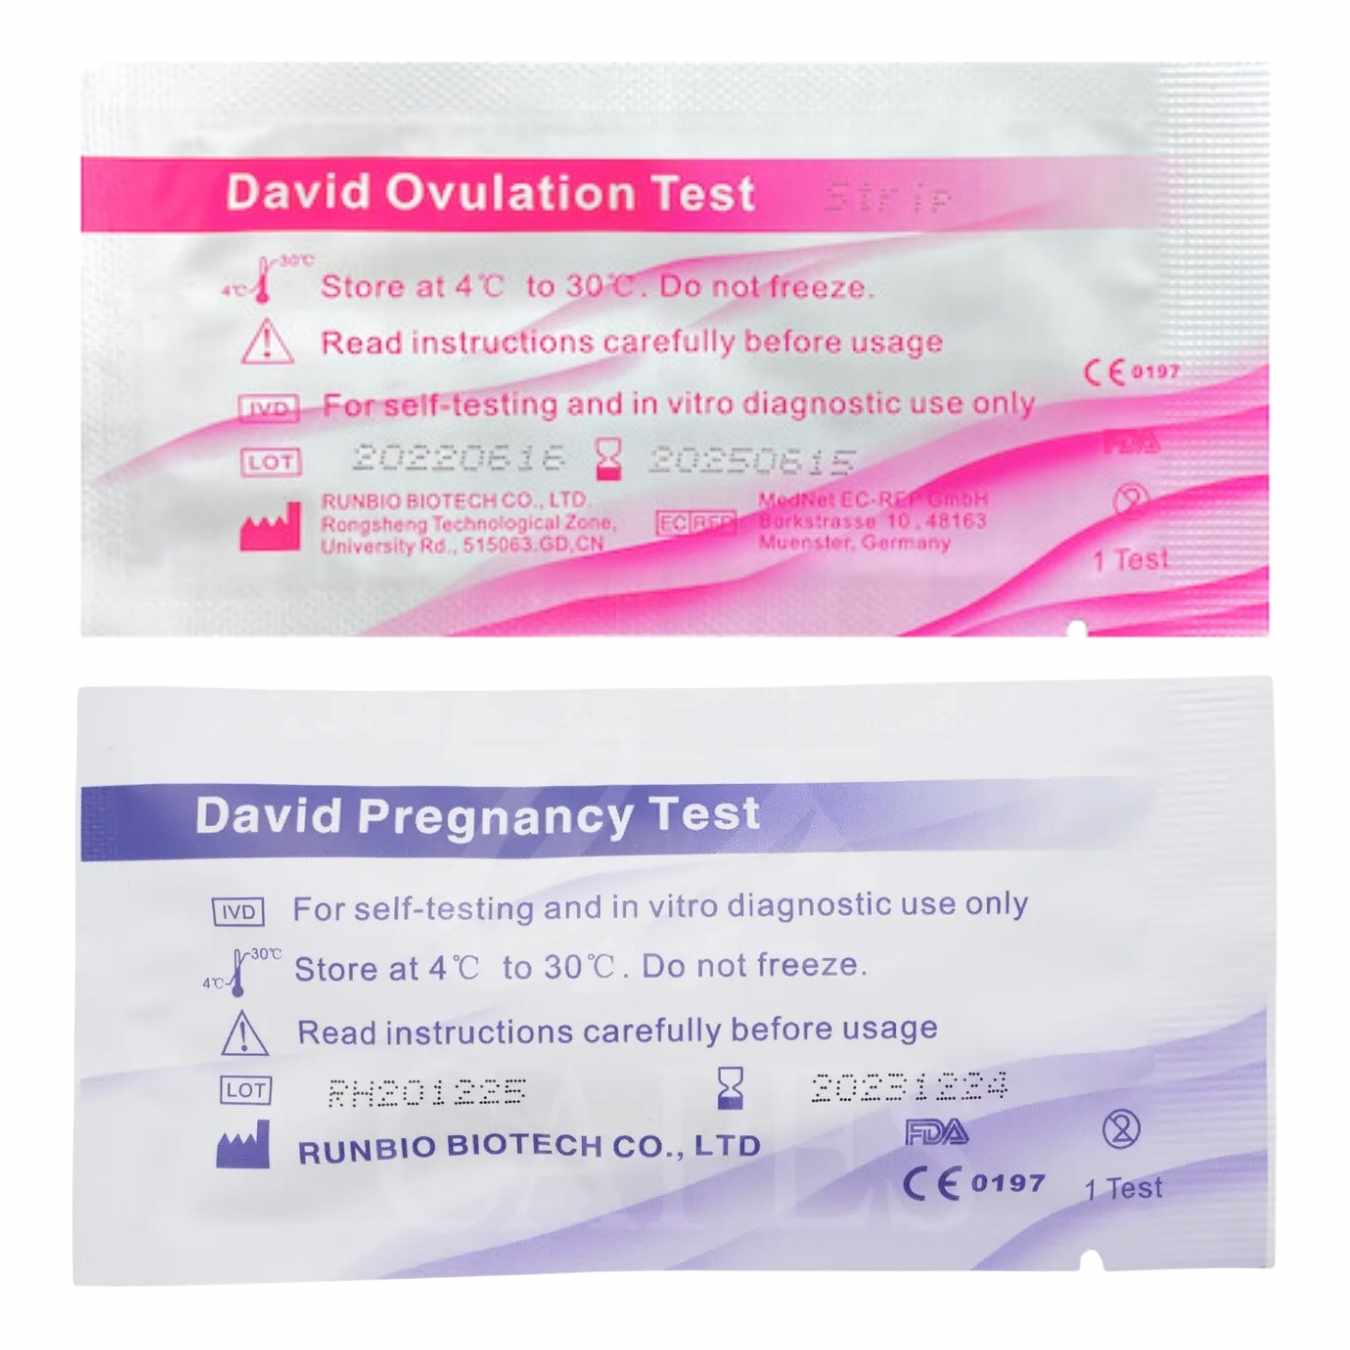 Pregnancy and ovulation test strips for Testing hormones levels of LH and HCGPregnancy and Ovulation Test Strips: LH and HCG Hormone Level Testing